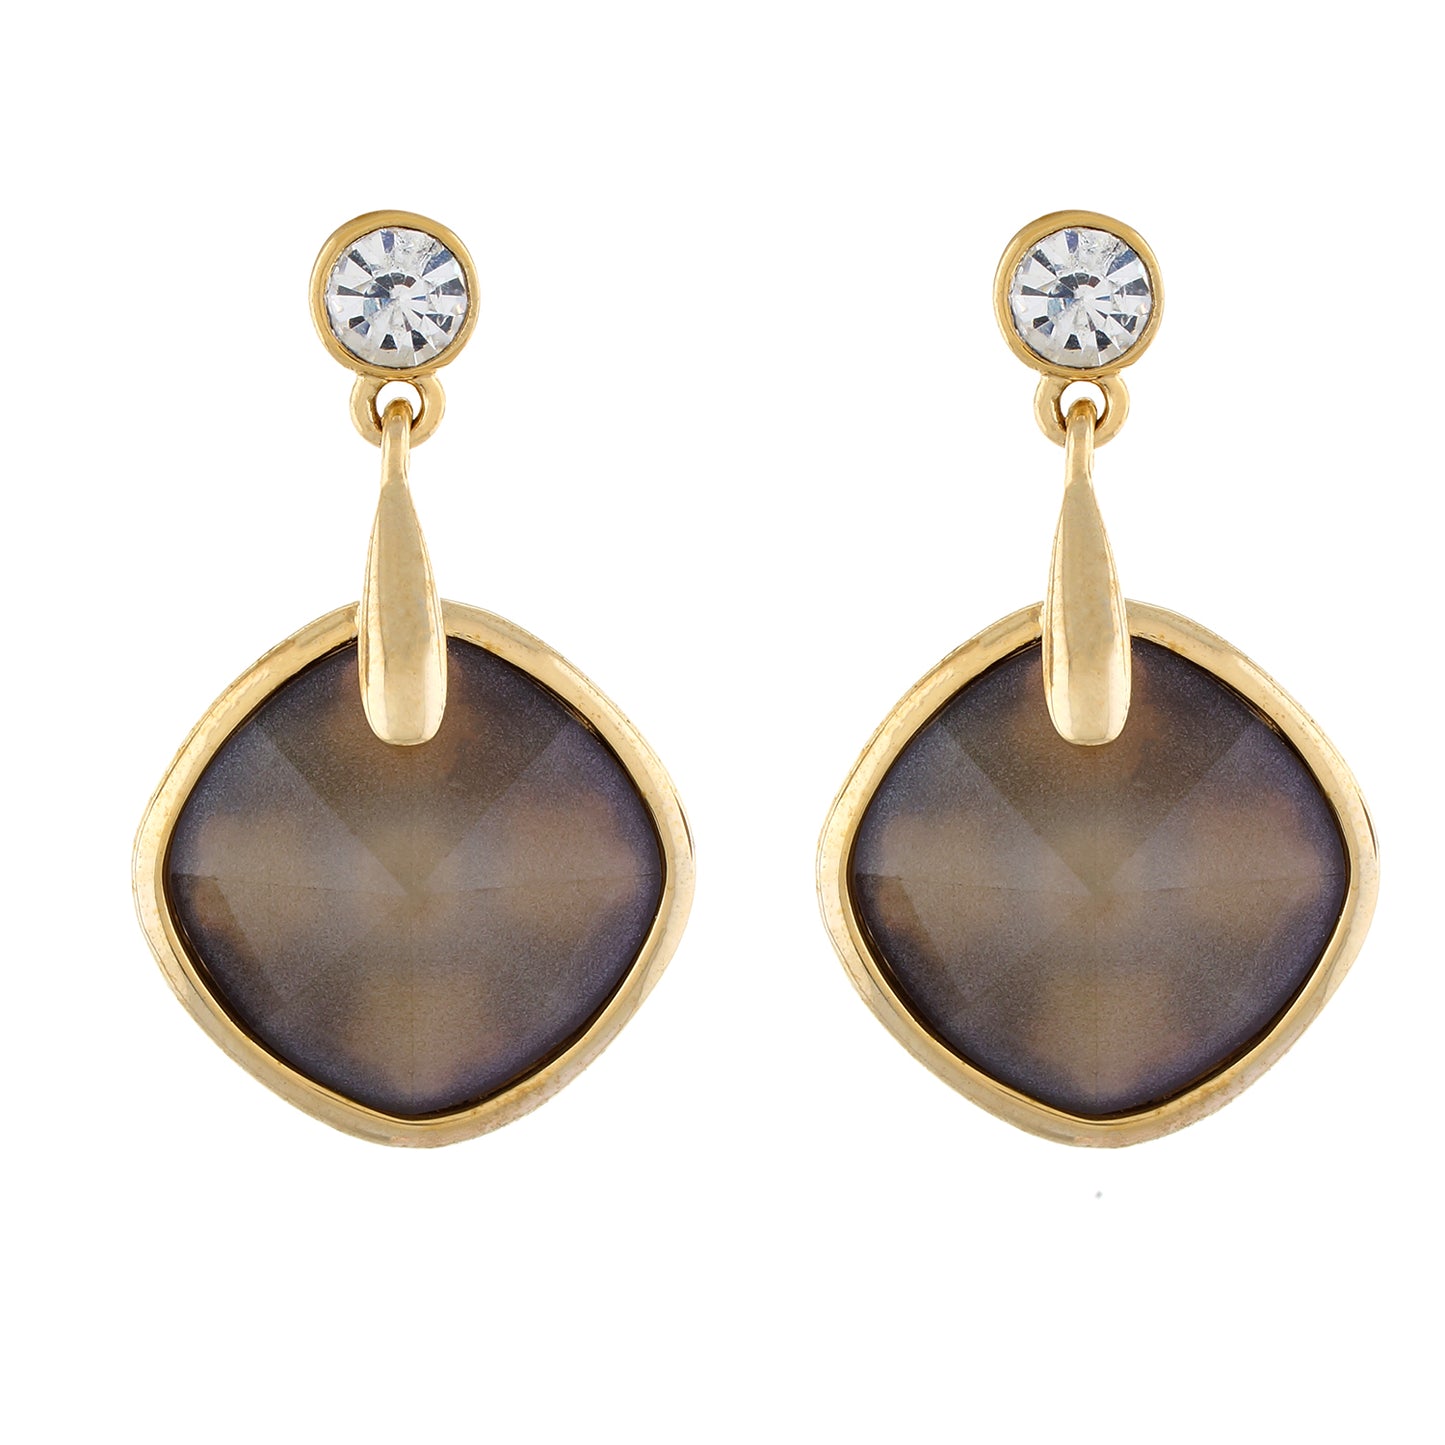 Brown colour Rohmbus Design Hanging Earrings for Girls and Women